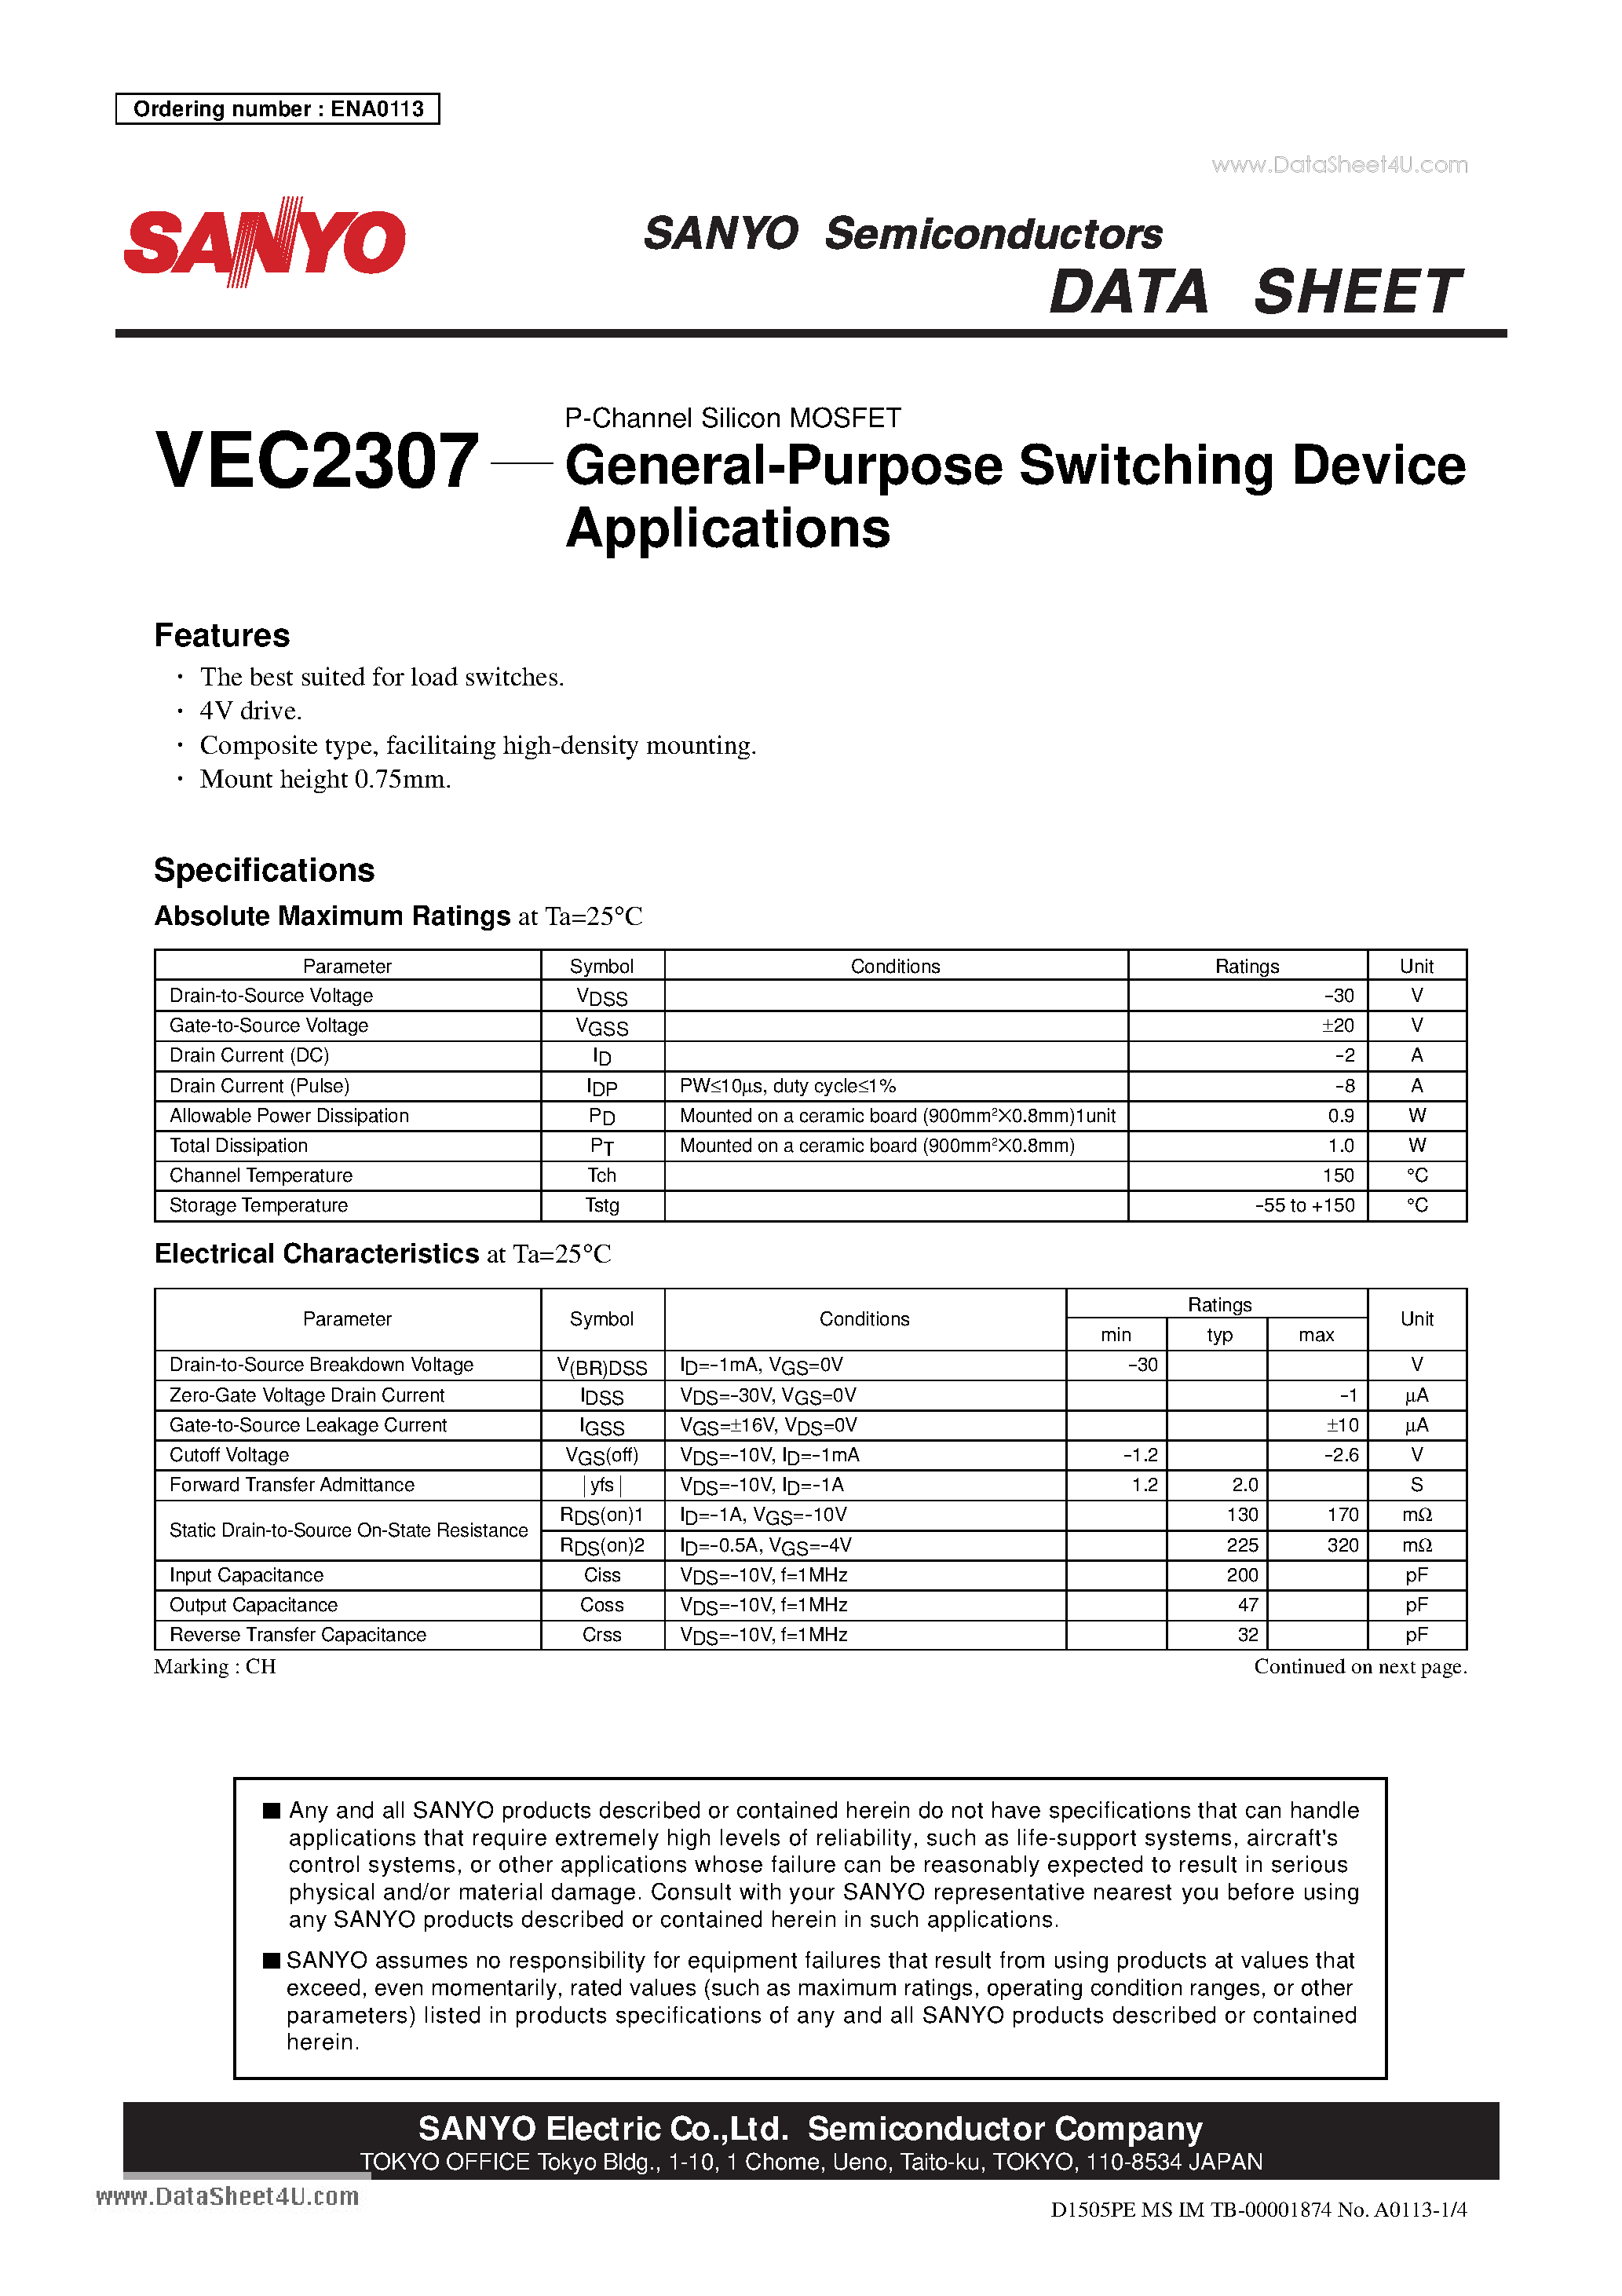 Datasheet VEC2307 - P-Channel Silicon MOSFET General-Purpose Switching Device page 1